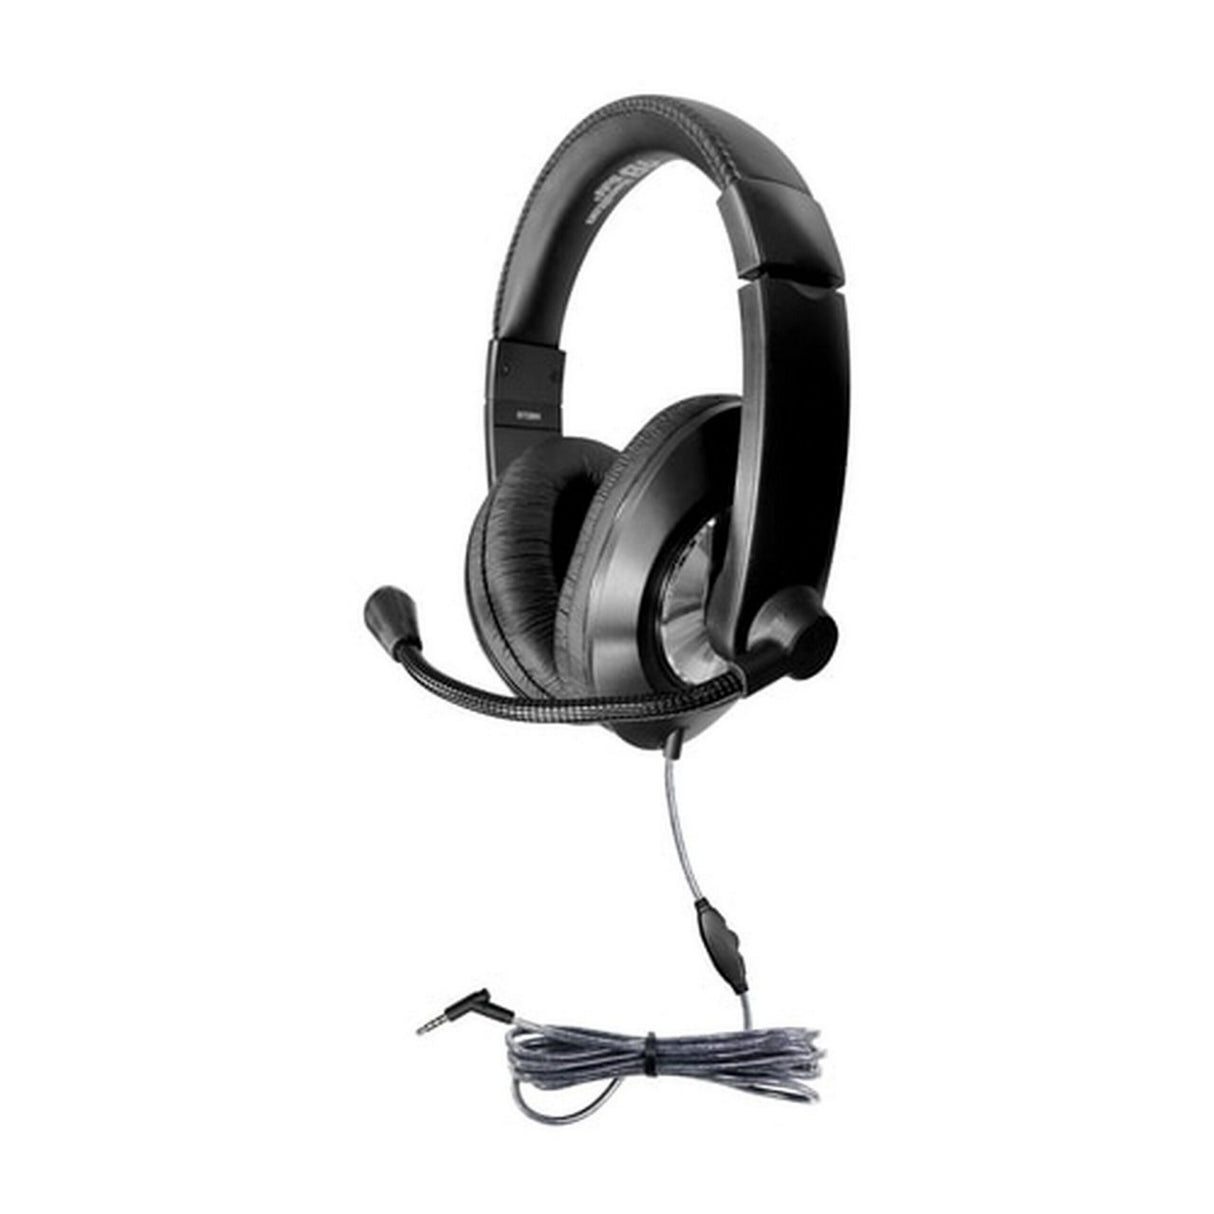 HamiltonBuhl ST2BK Smart-Trek Deluxe Stereo Headset with In-Line Volume Control and 3.5mm TRRS Plug